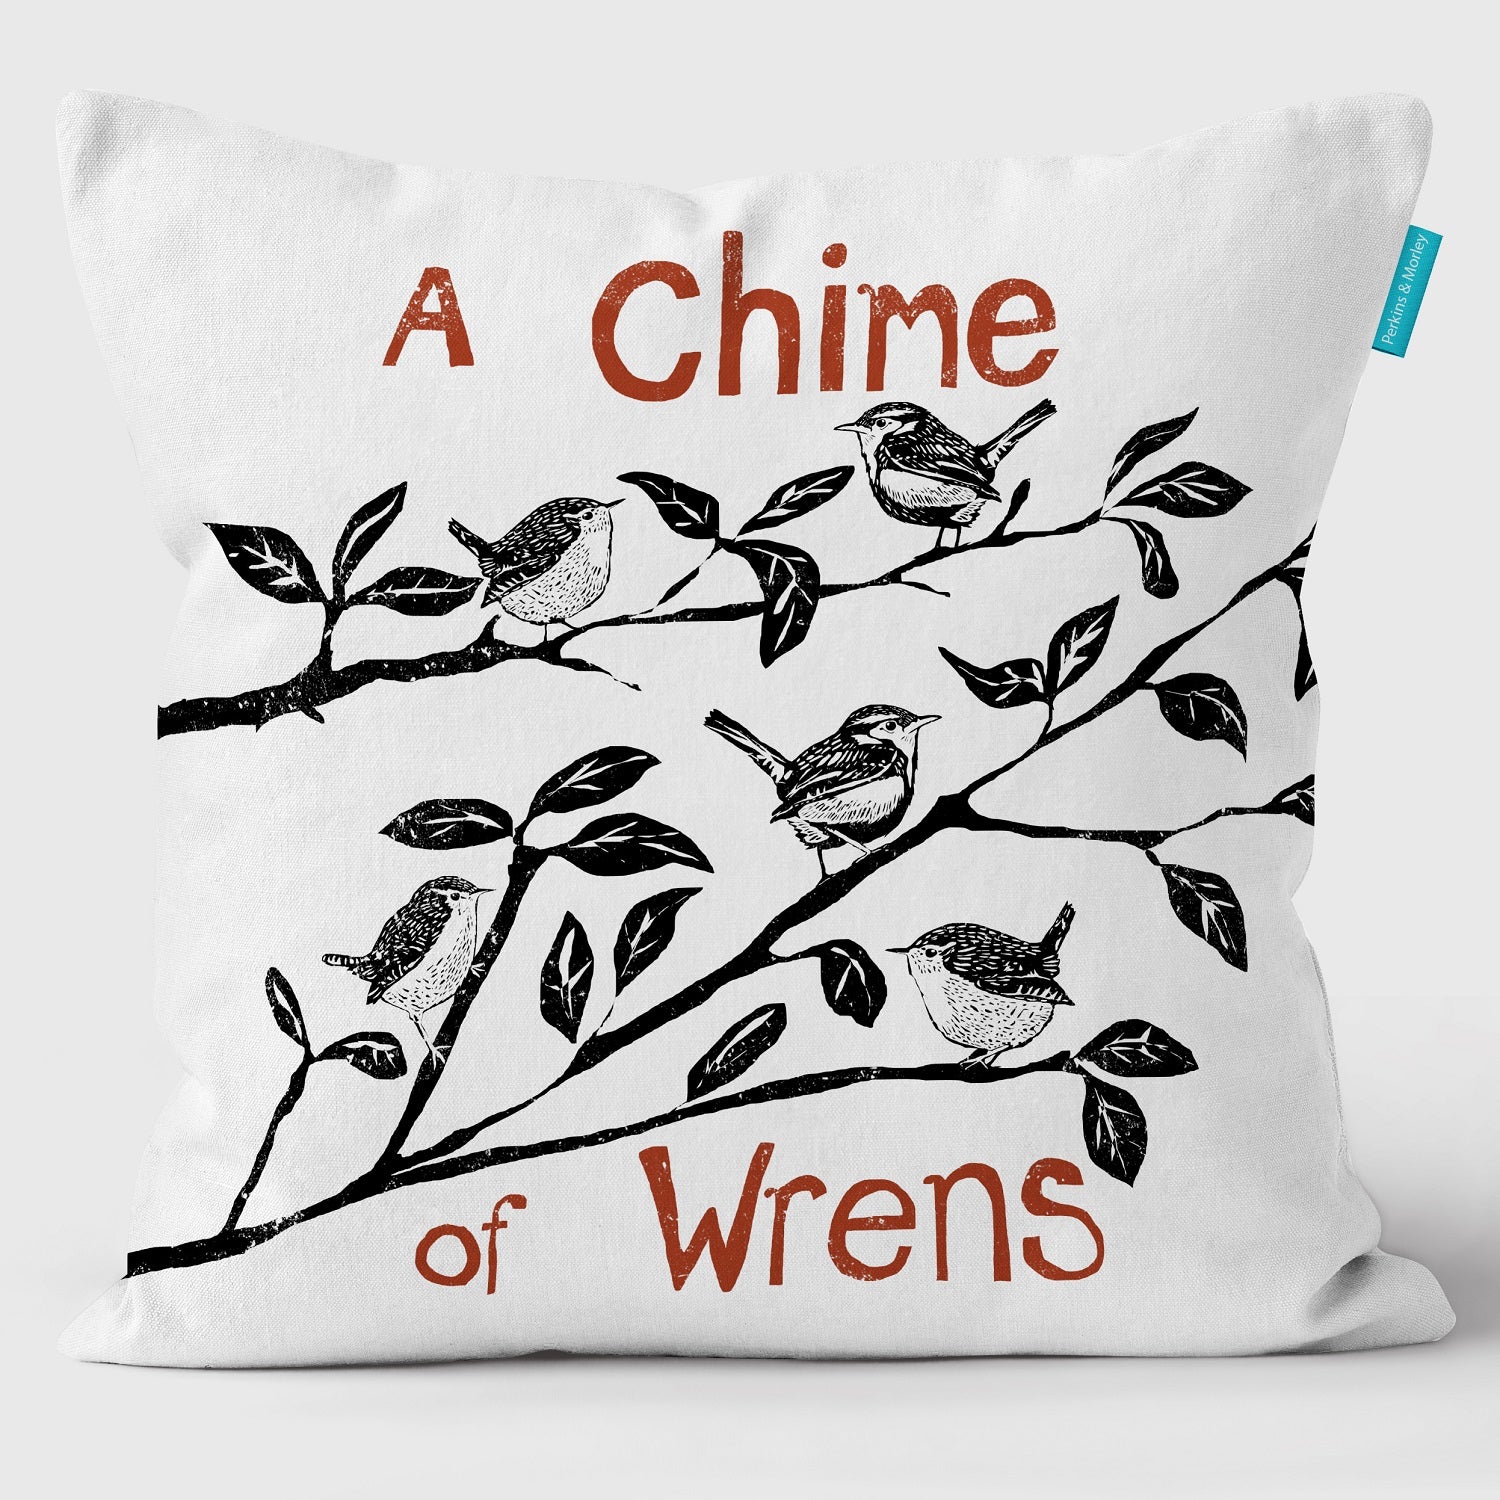 Chime of Wrens - Collective Noun Cushion